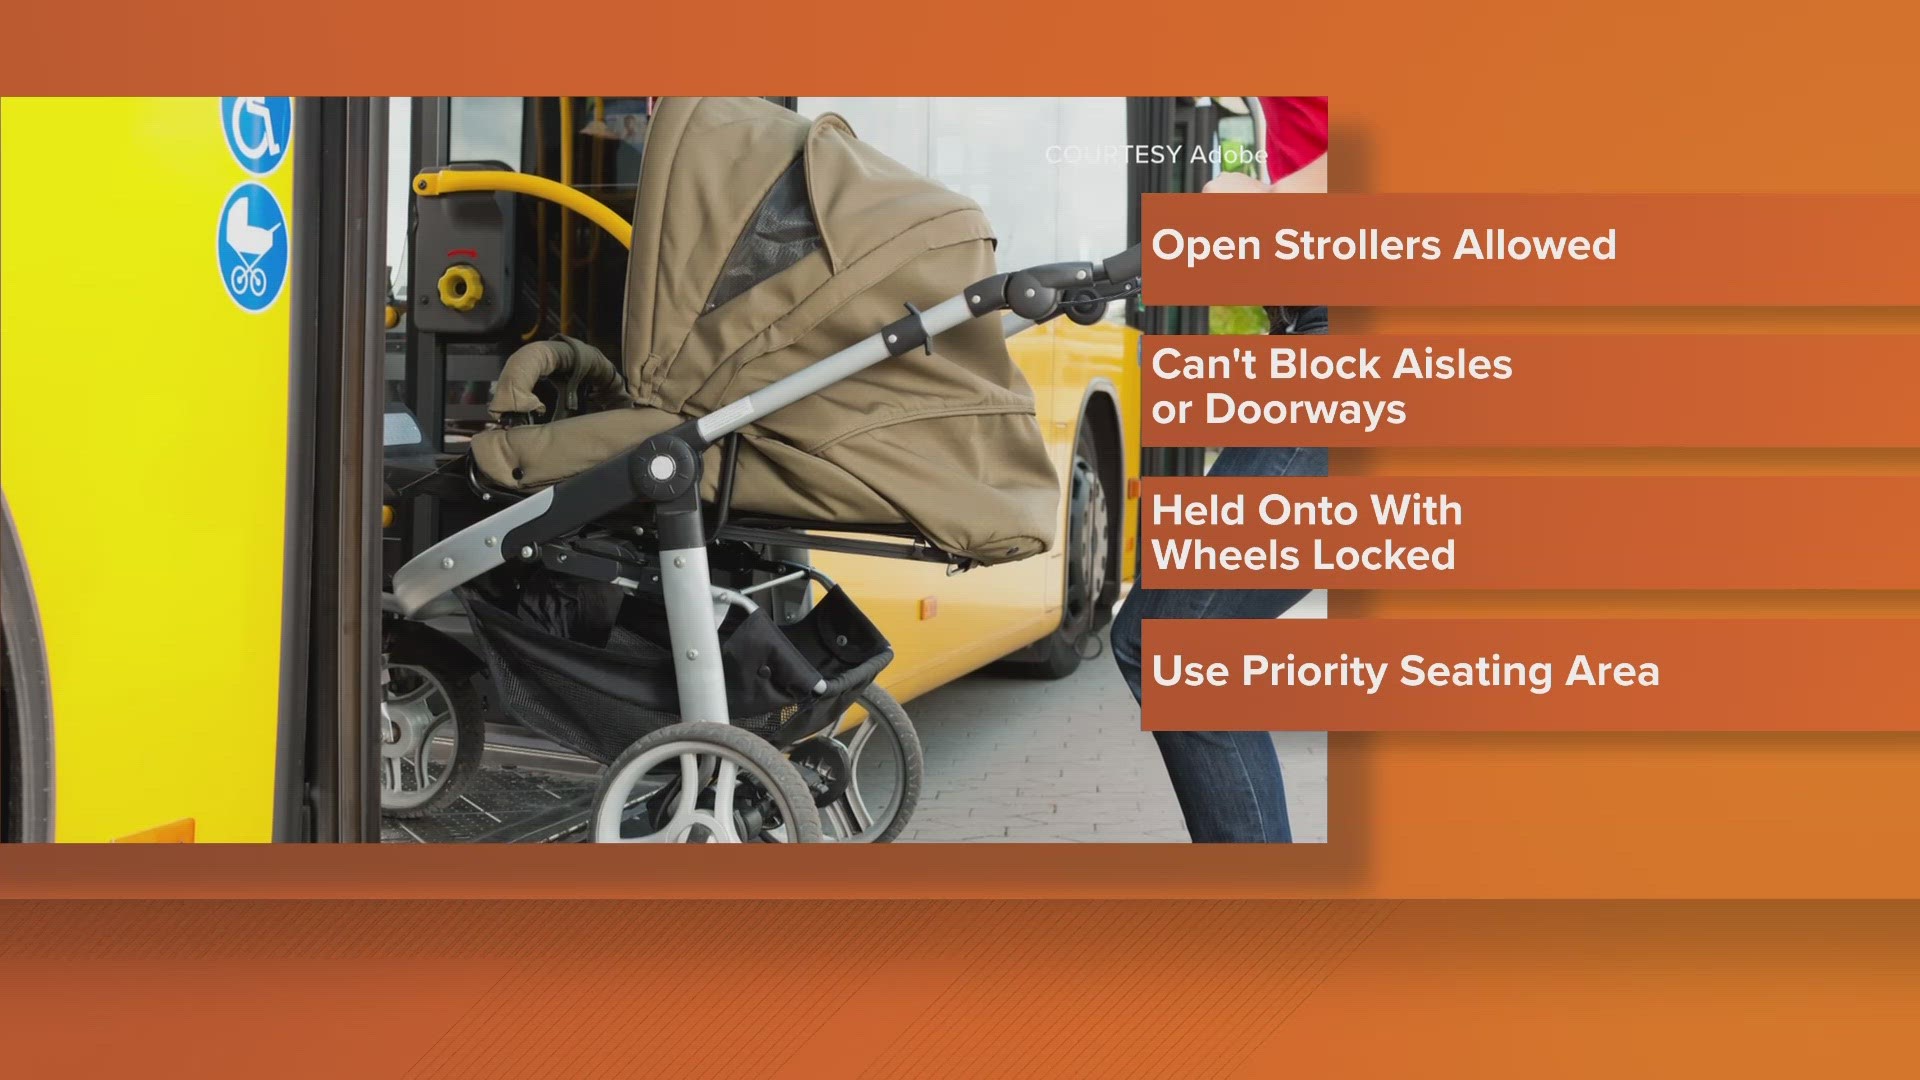 The strollers will be required to not block aisles or doorways and should be held on to at all times.